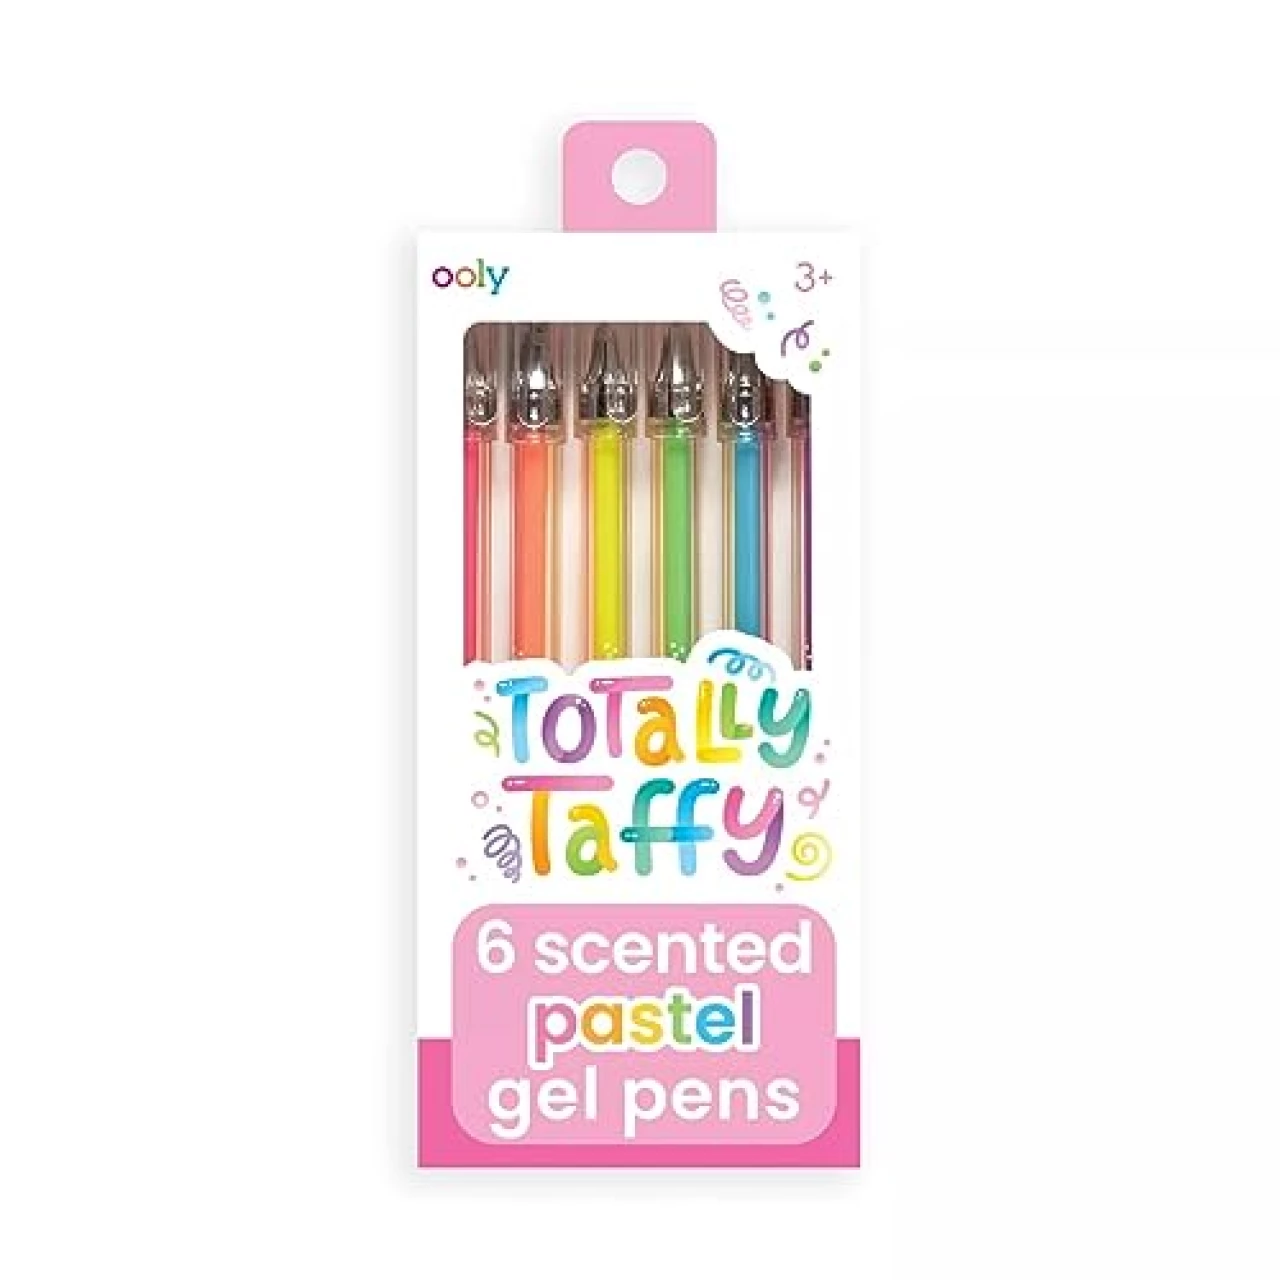 Ooly Scented Totally Taffy Gel Set of 6 Pens - Pastel Scented Gel Pens for Kids, Adults, Art Supplies and Stationary Supplies [Totally Taffy Pastel Gel Pens - 6 Pack]